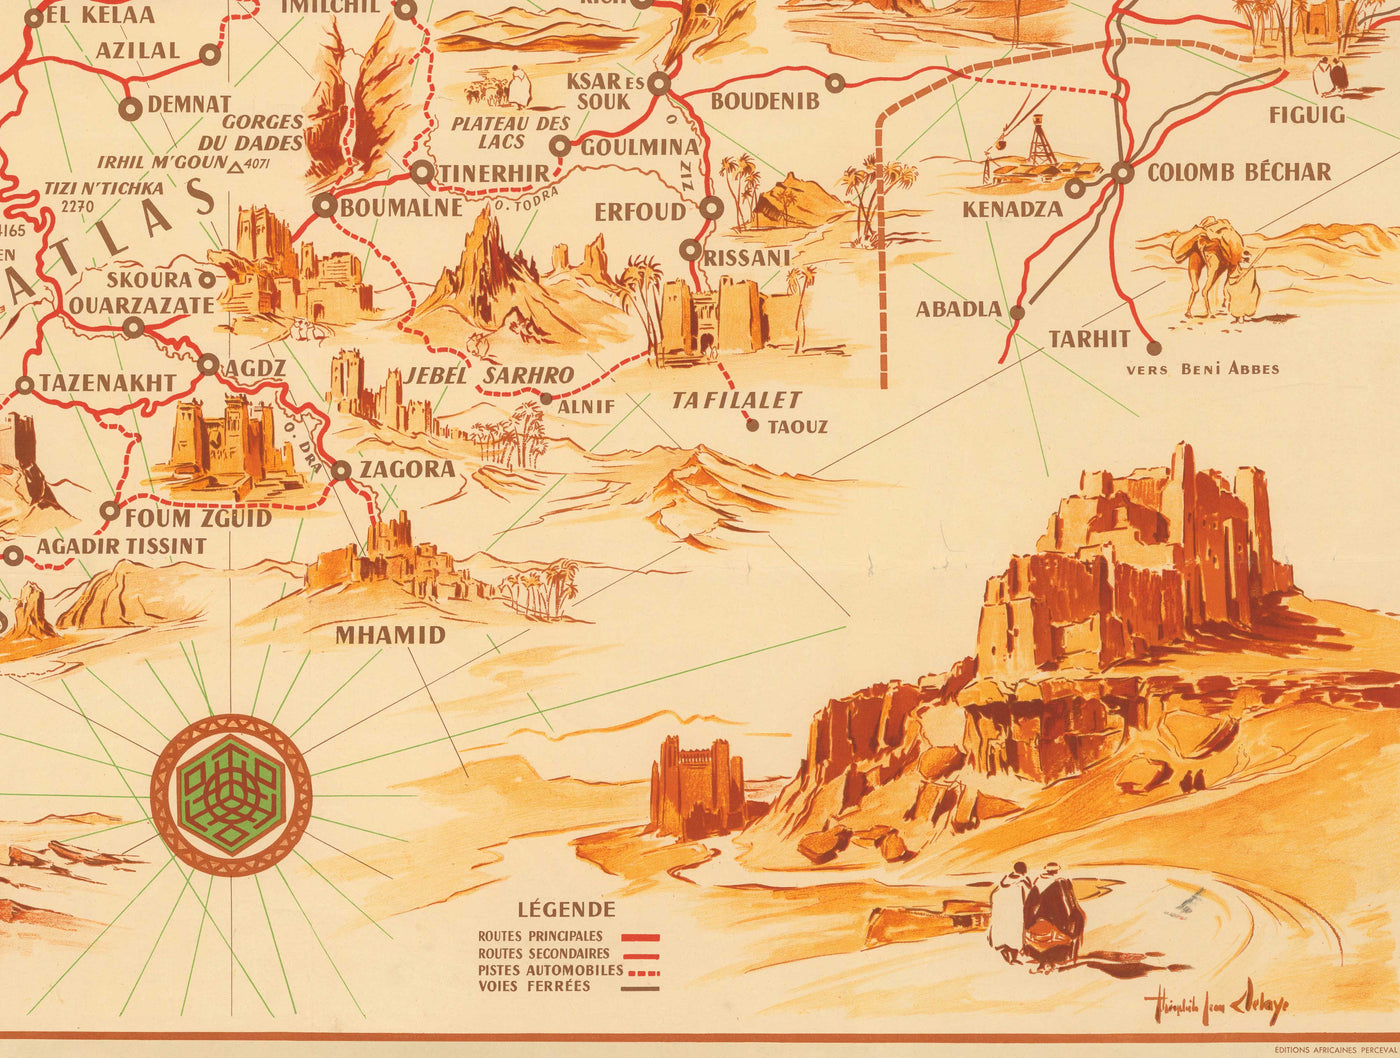 Old Map of Morocco by Theophile-Jean Delaye in 1950 - Casablanca, Rabat, Fes, Marrakesh, Tangier